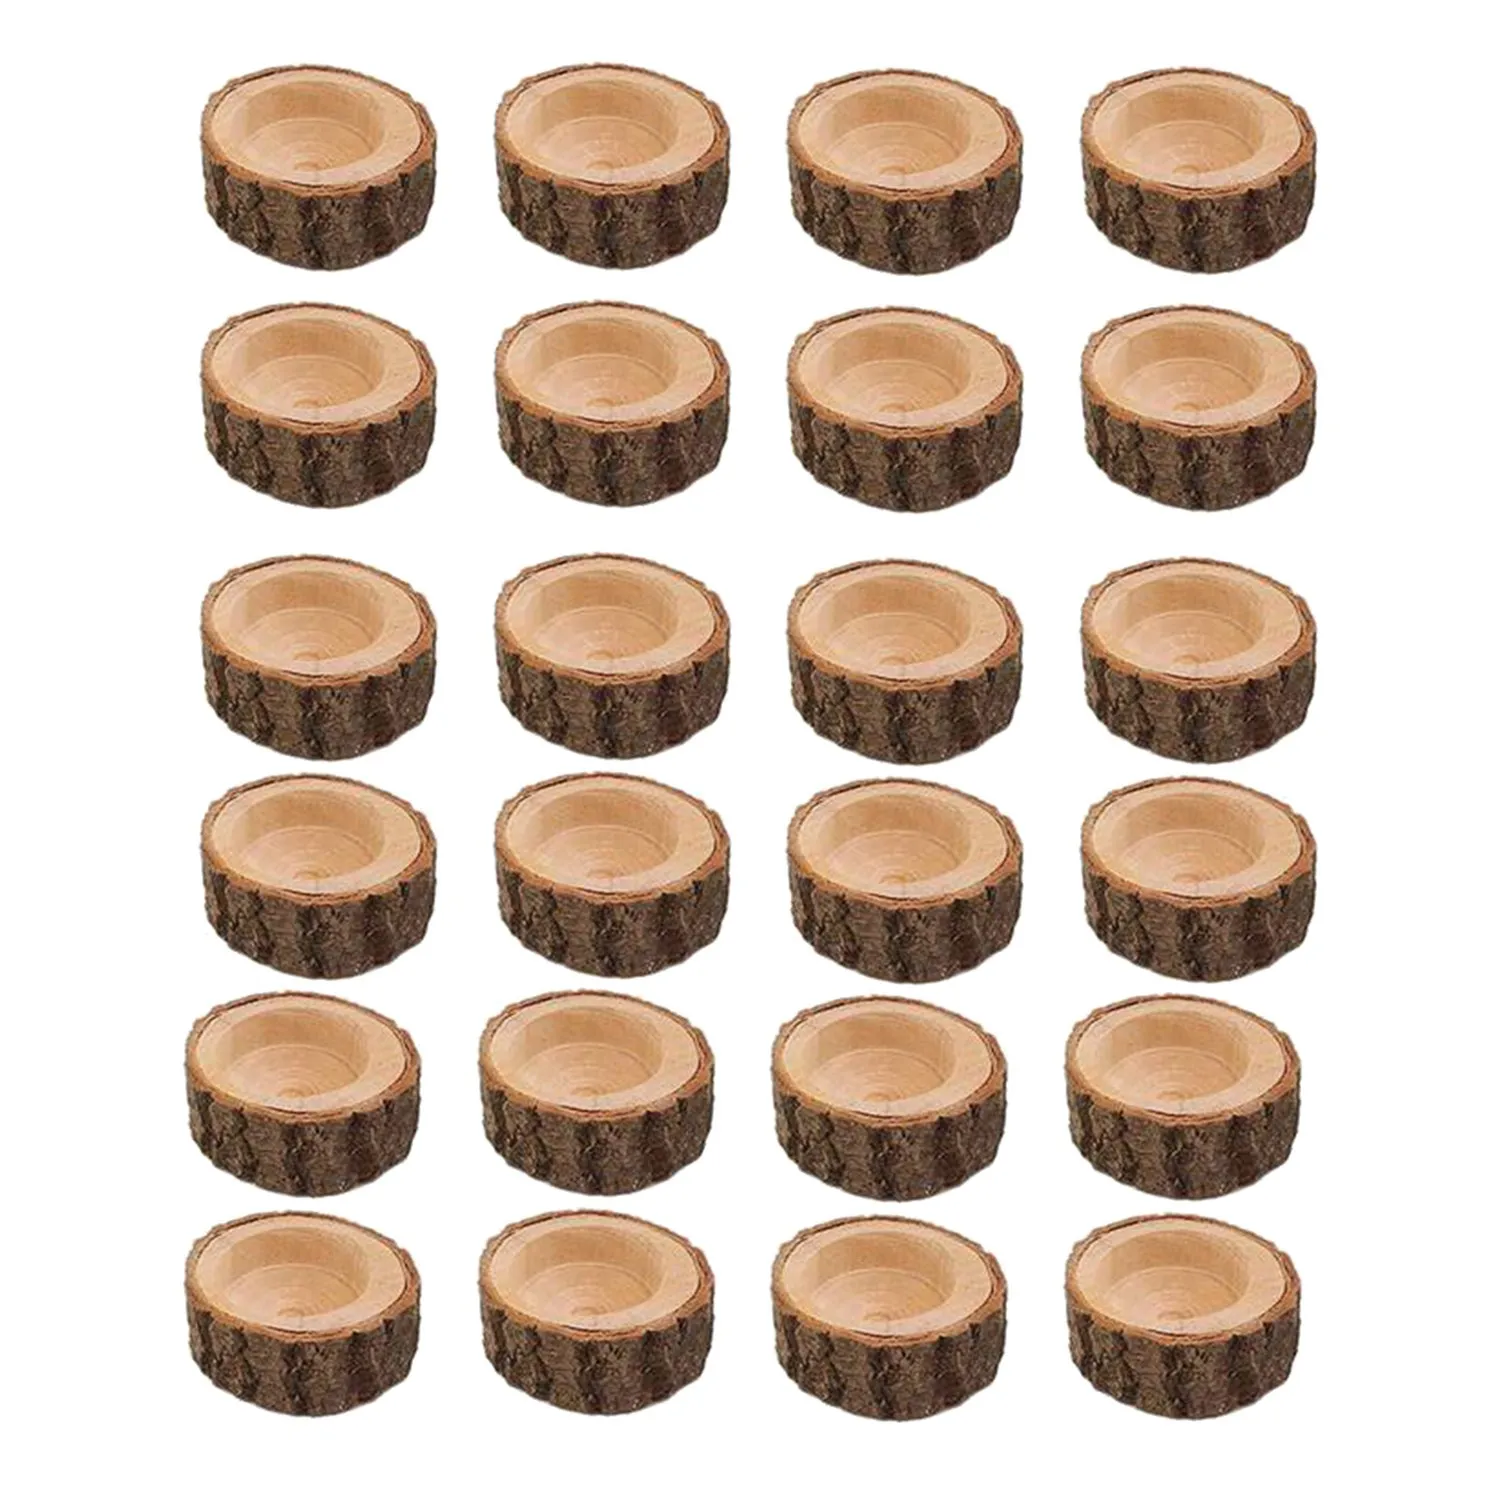 

24Pcs Wooden Candle Holder,Votive Tealight Holder for Wedding Party for Table,Birthday Christmas Party Home Decor